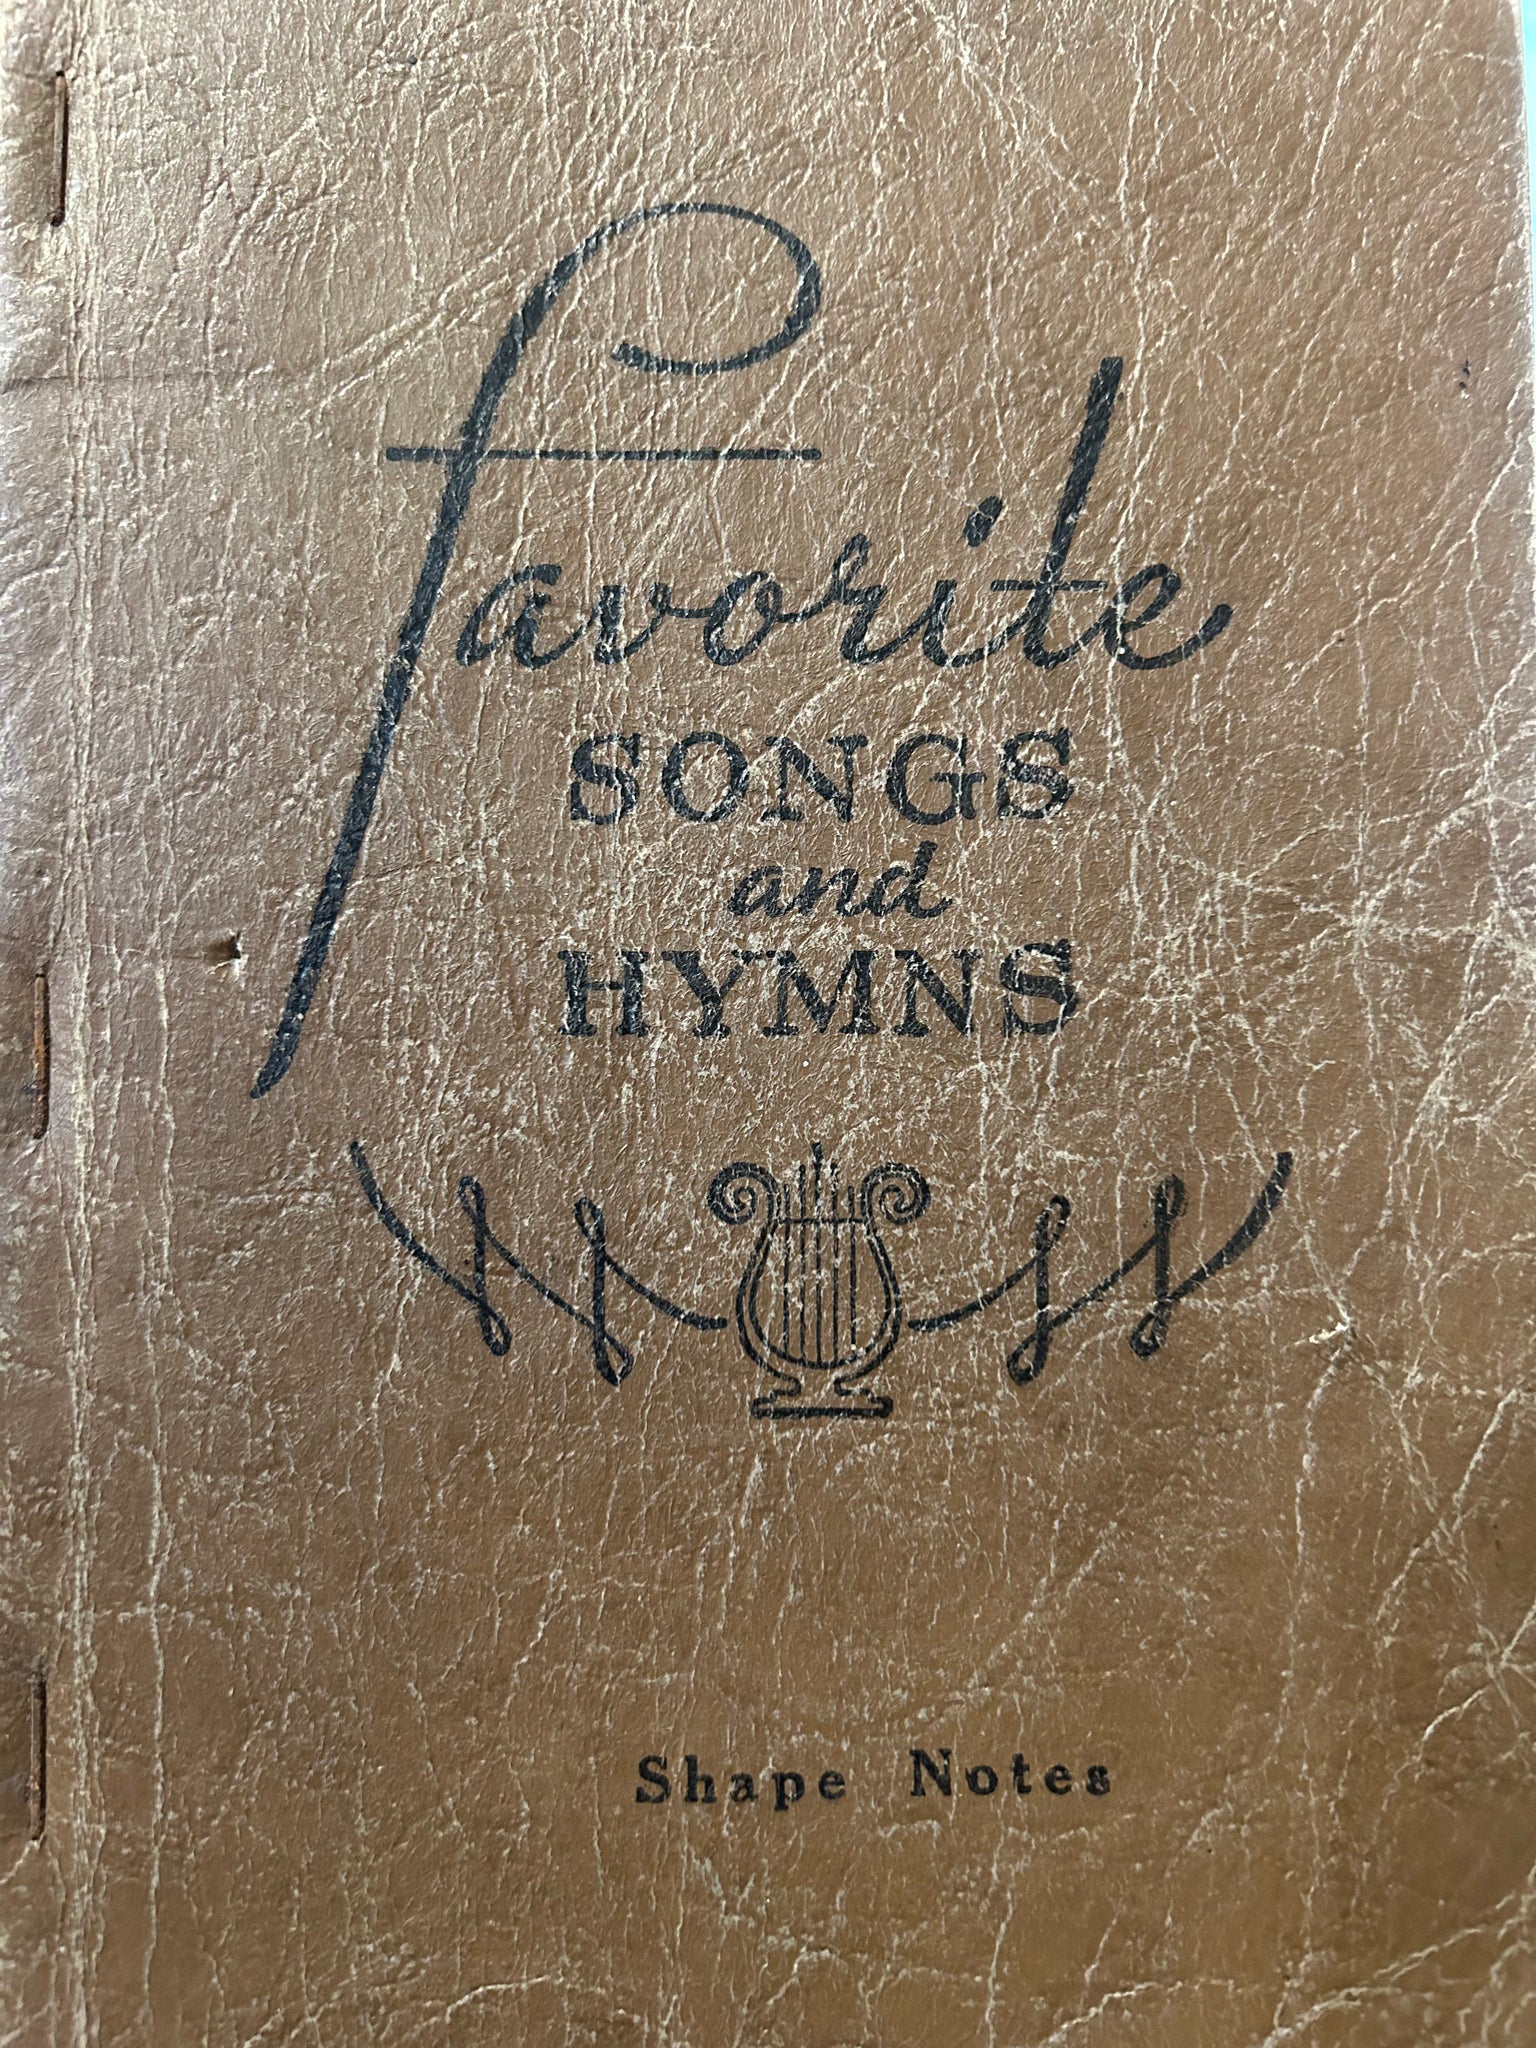 Favorite Songs and Hymns